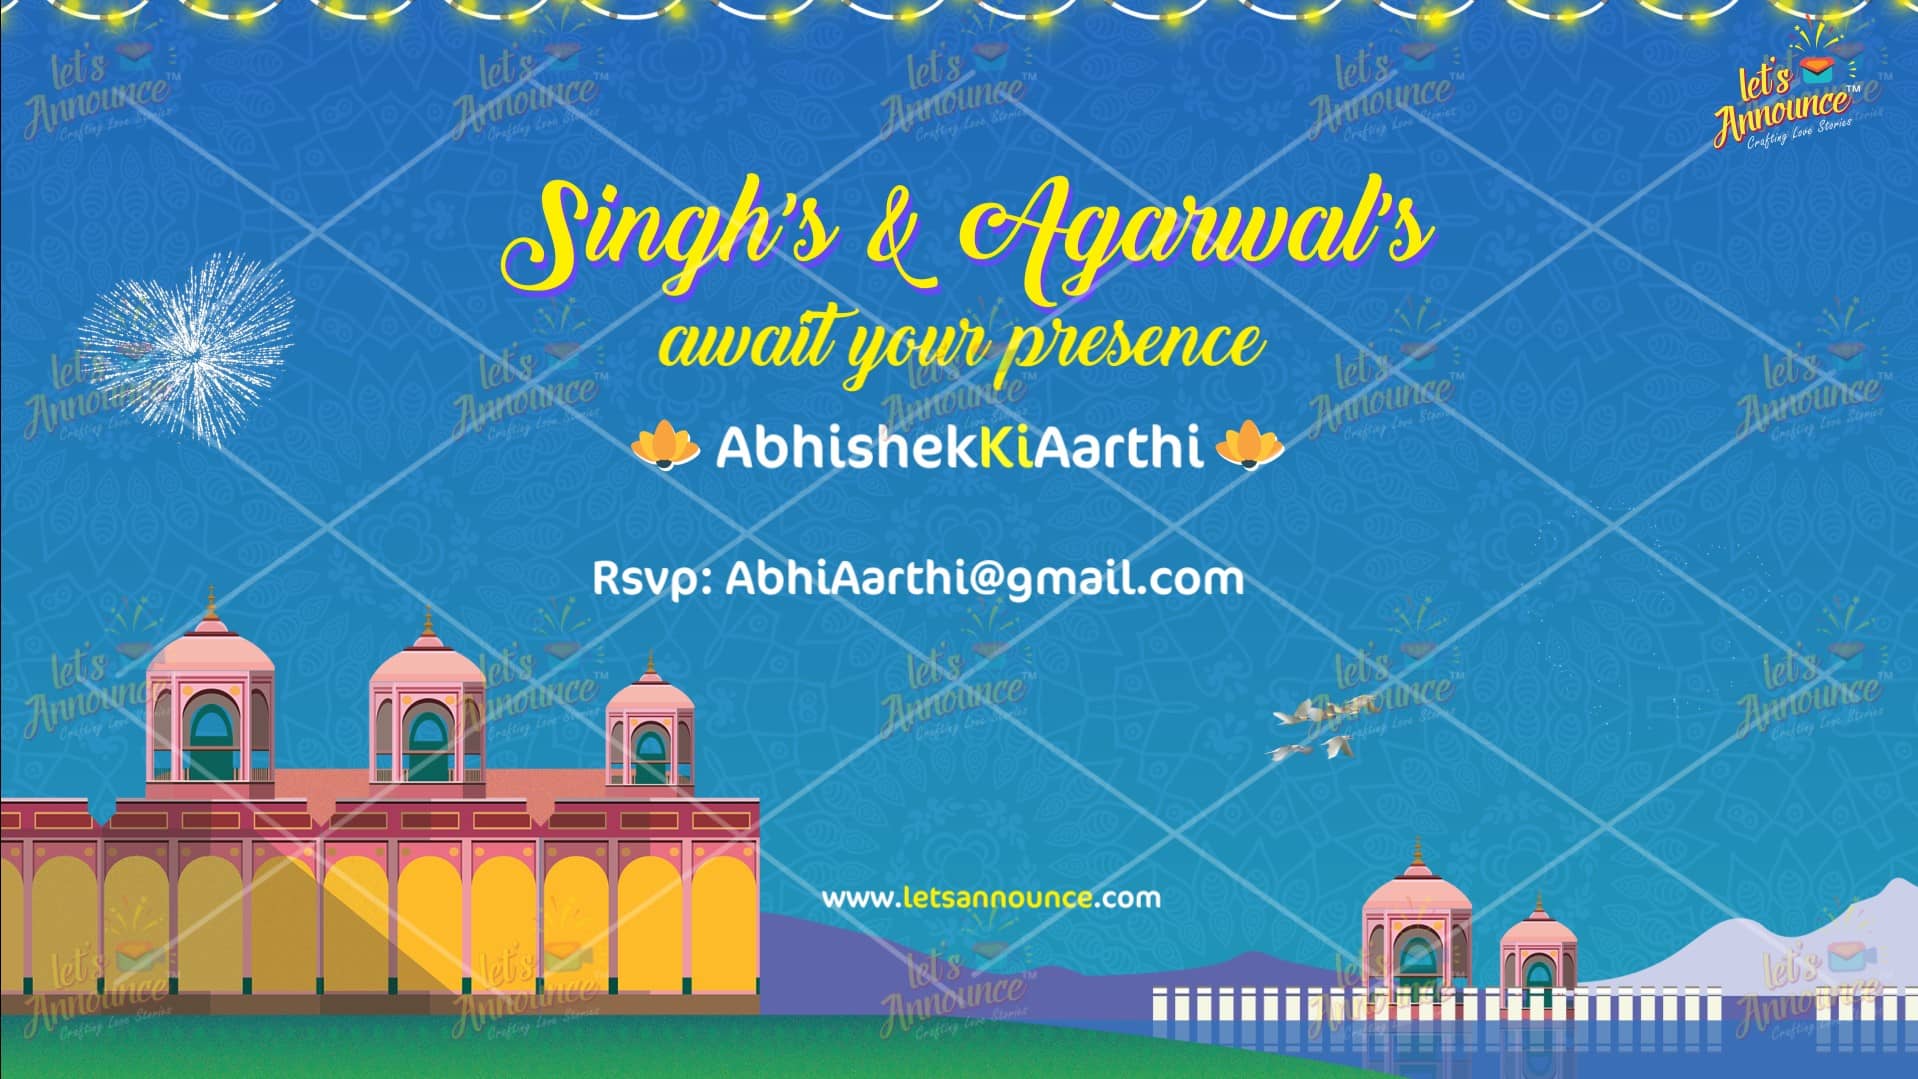 The Awesome indian wedding invite -87 sec (USD 100$)